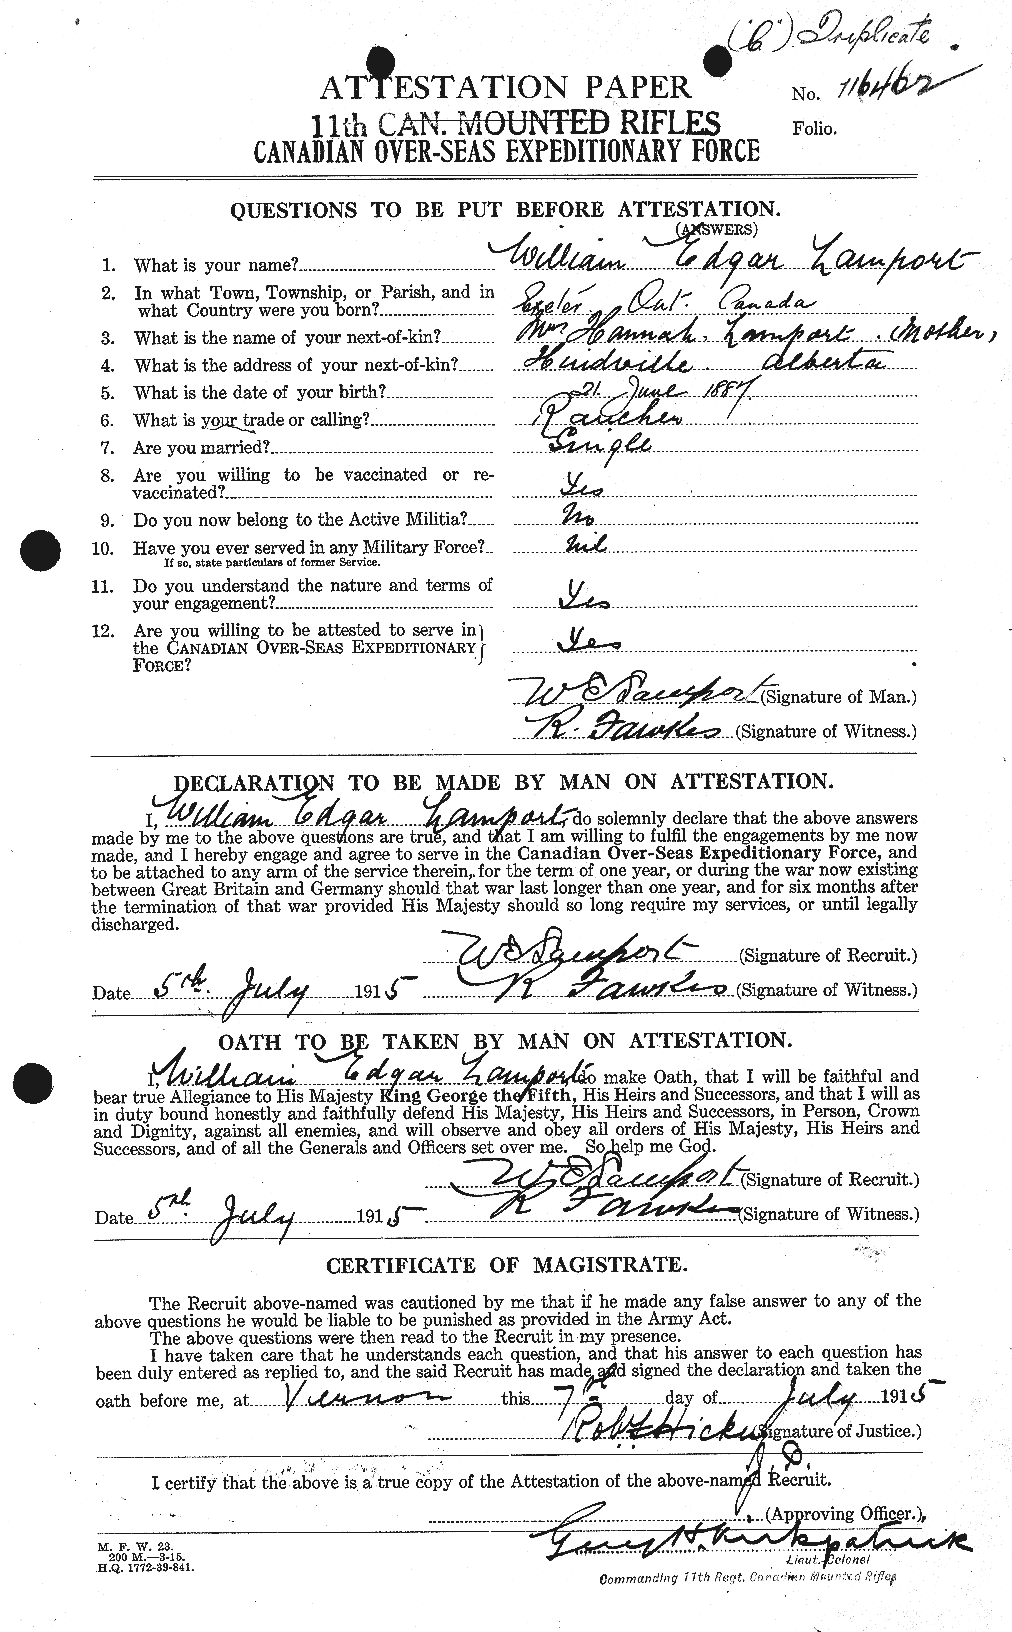 Personnel Records of the First World War - CEF 448281a